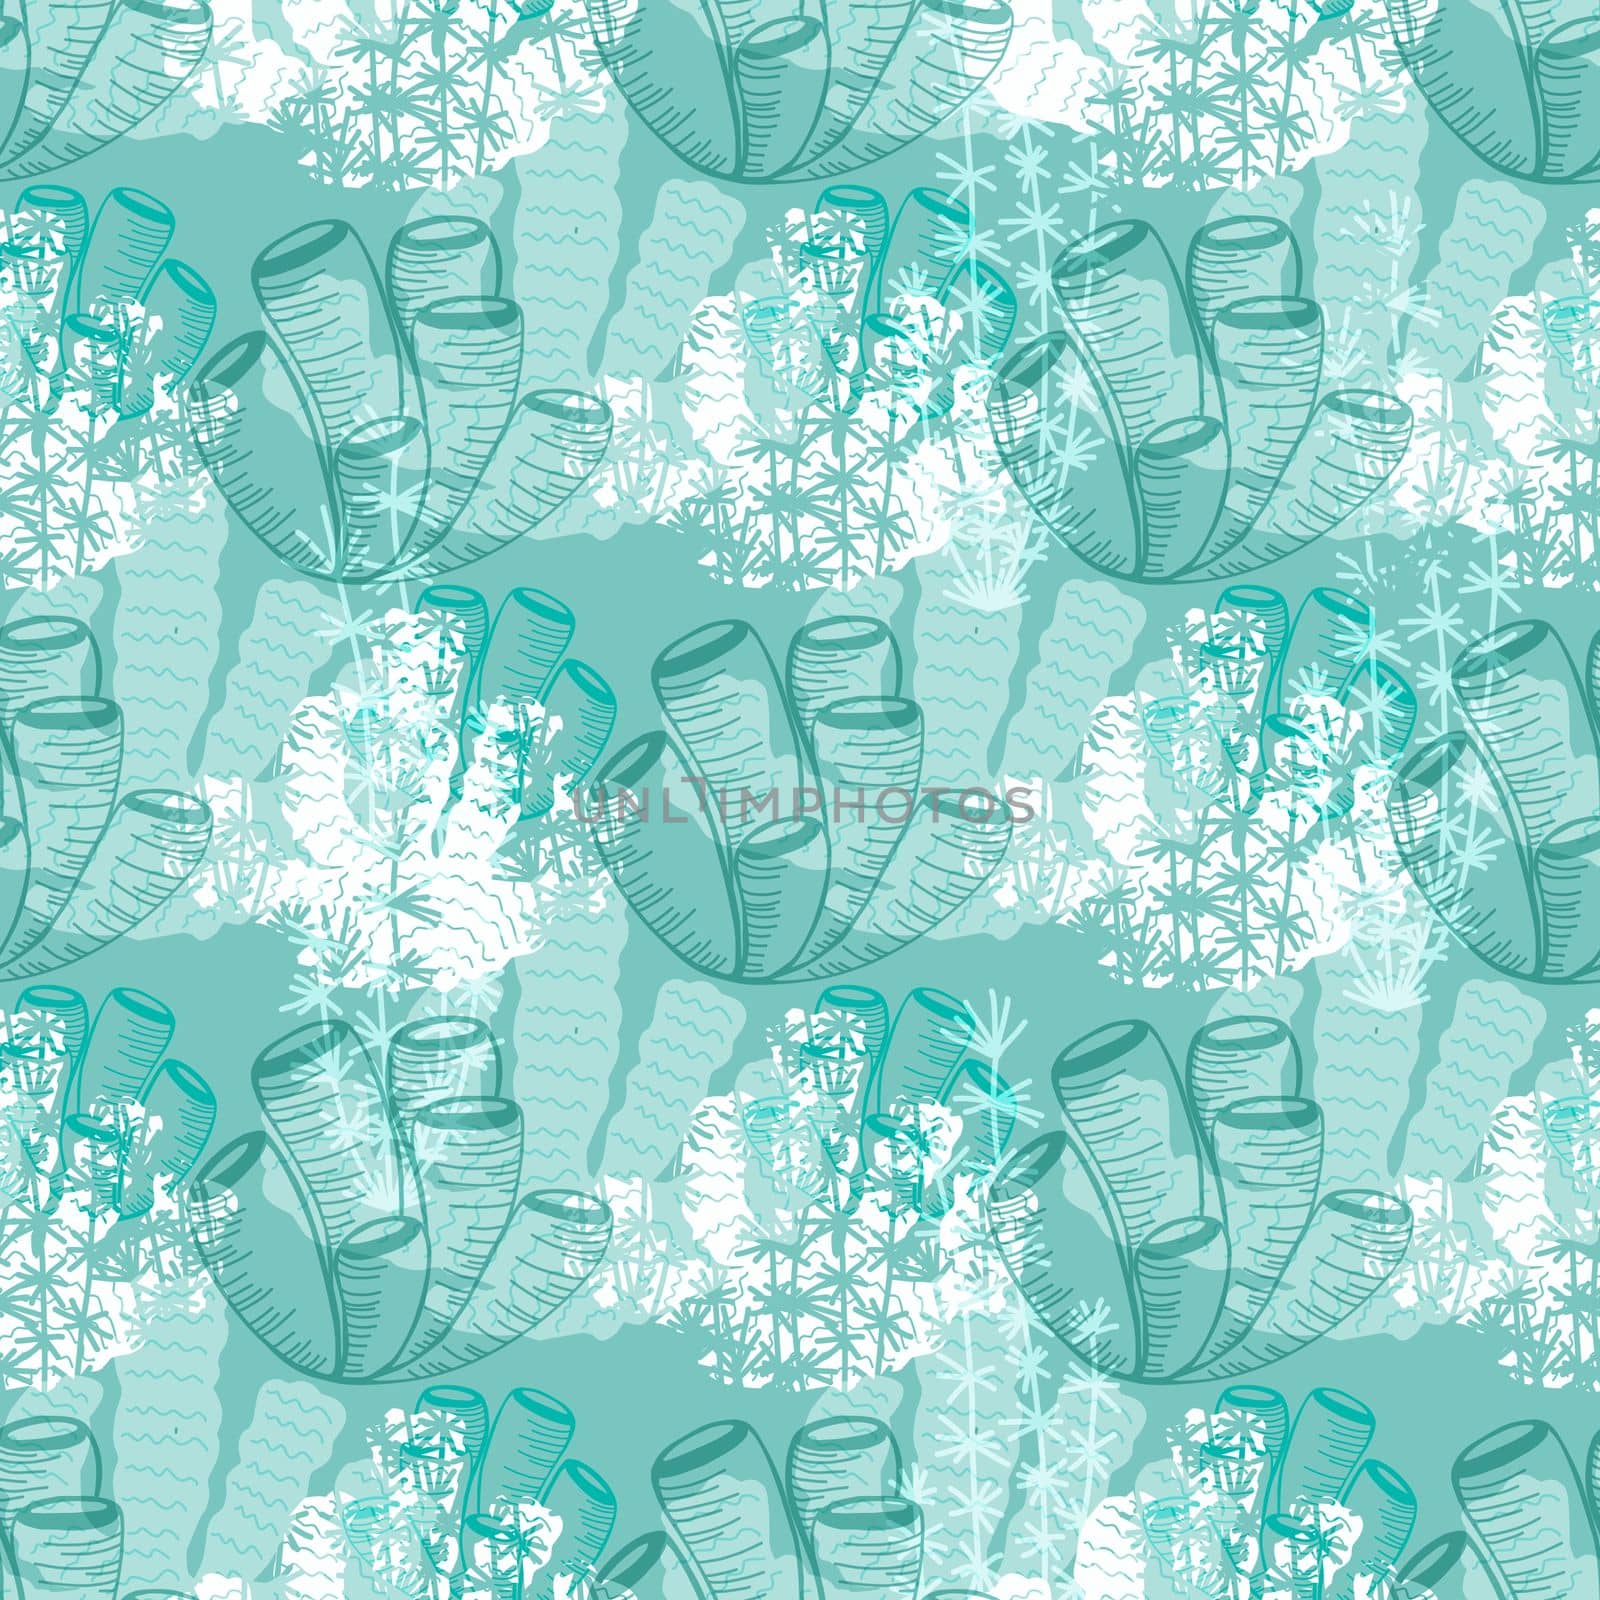 Seamless pattern with a vertical pattern of algae. Turquoise background. Trendy design seamless with underwater plants.Aqua color.